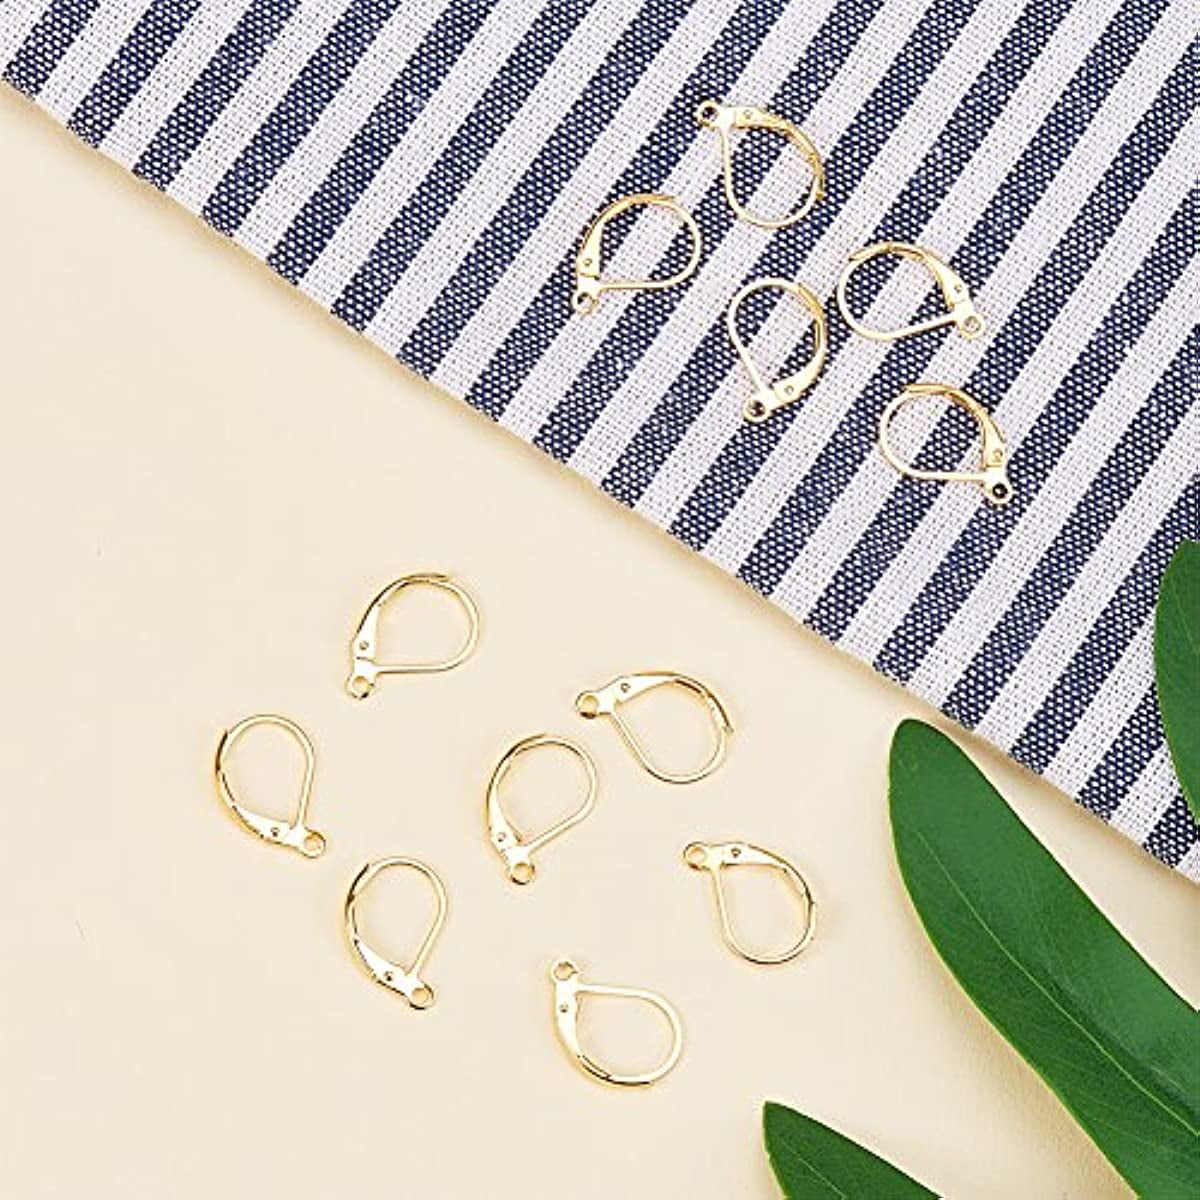 MAGICLULU 10PCS Spring O Ring 1.5 Inch Metal Round Carabiner Clip Circle  Key Ring Clips for Keychain Buckle Bags Purse Handbag Craft Jewelry Making